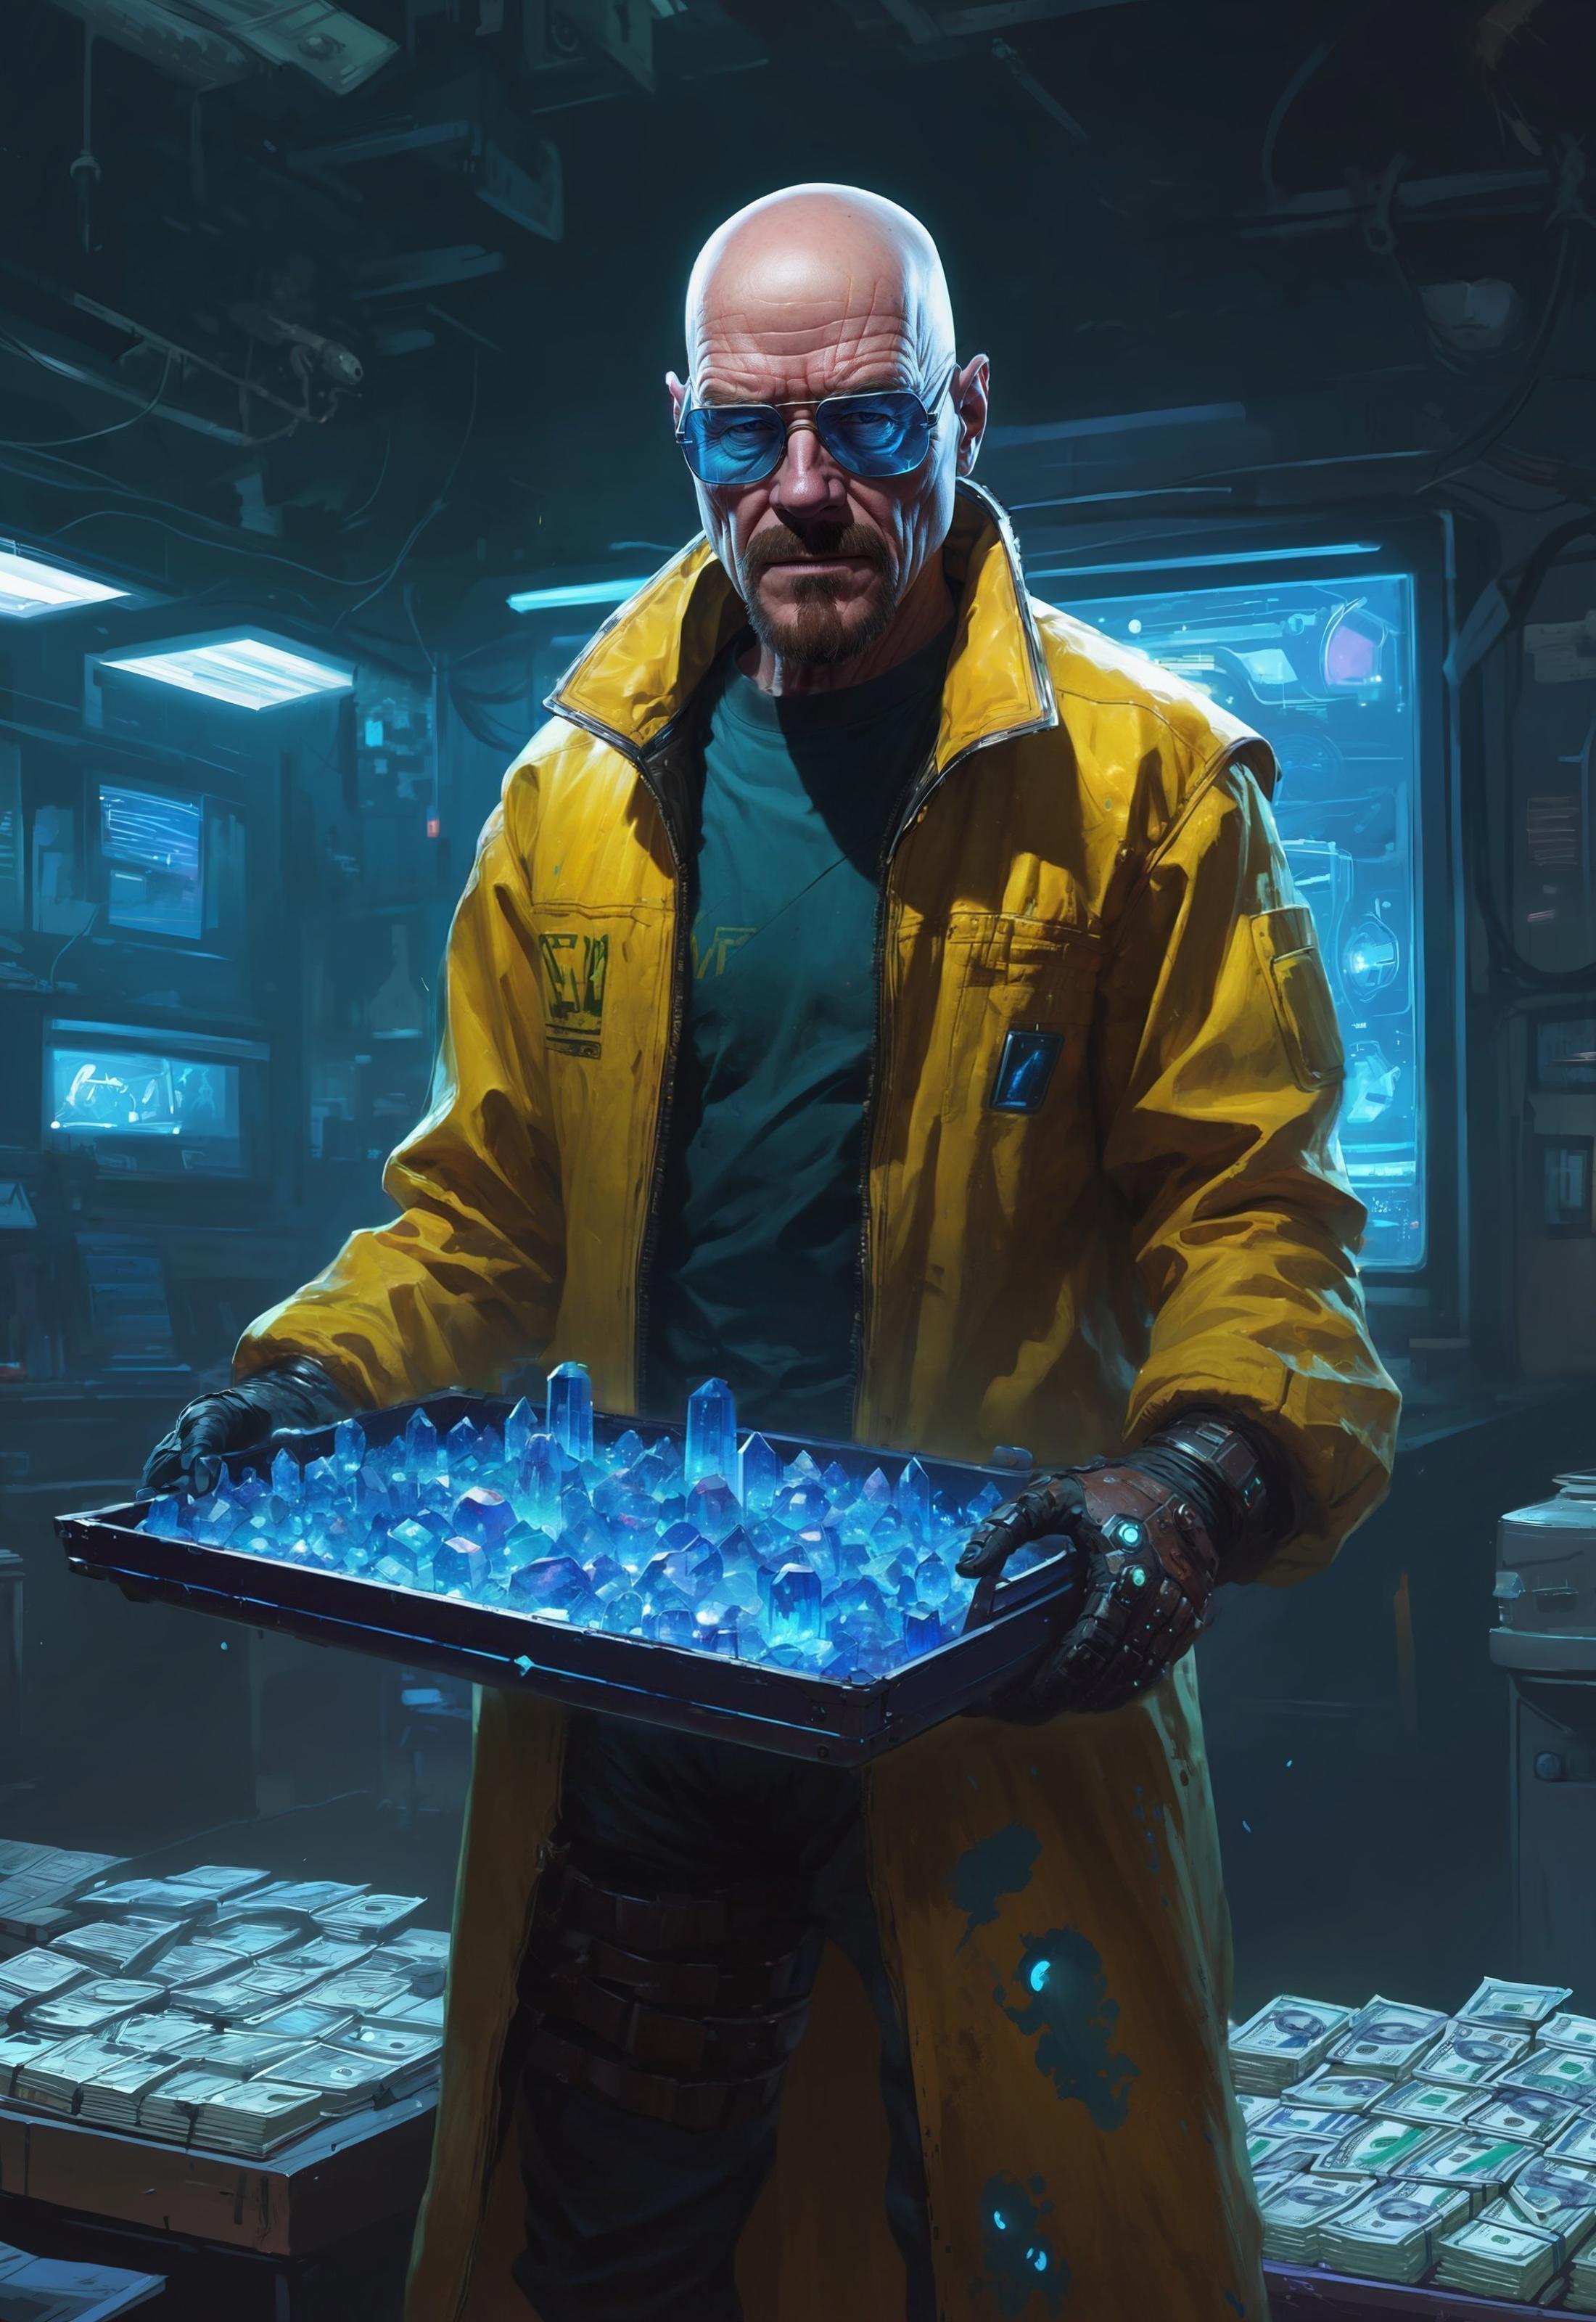 A man in a yellow jacket holding a tray of blue objects.